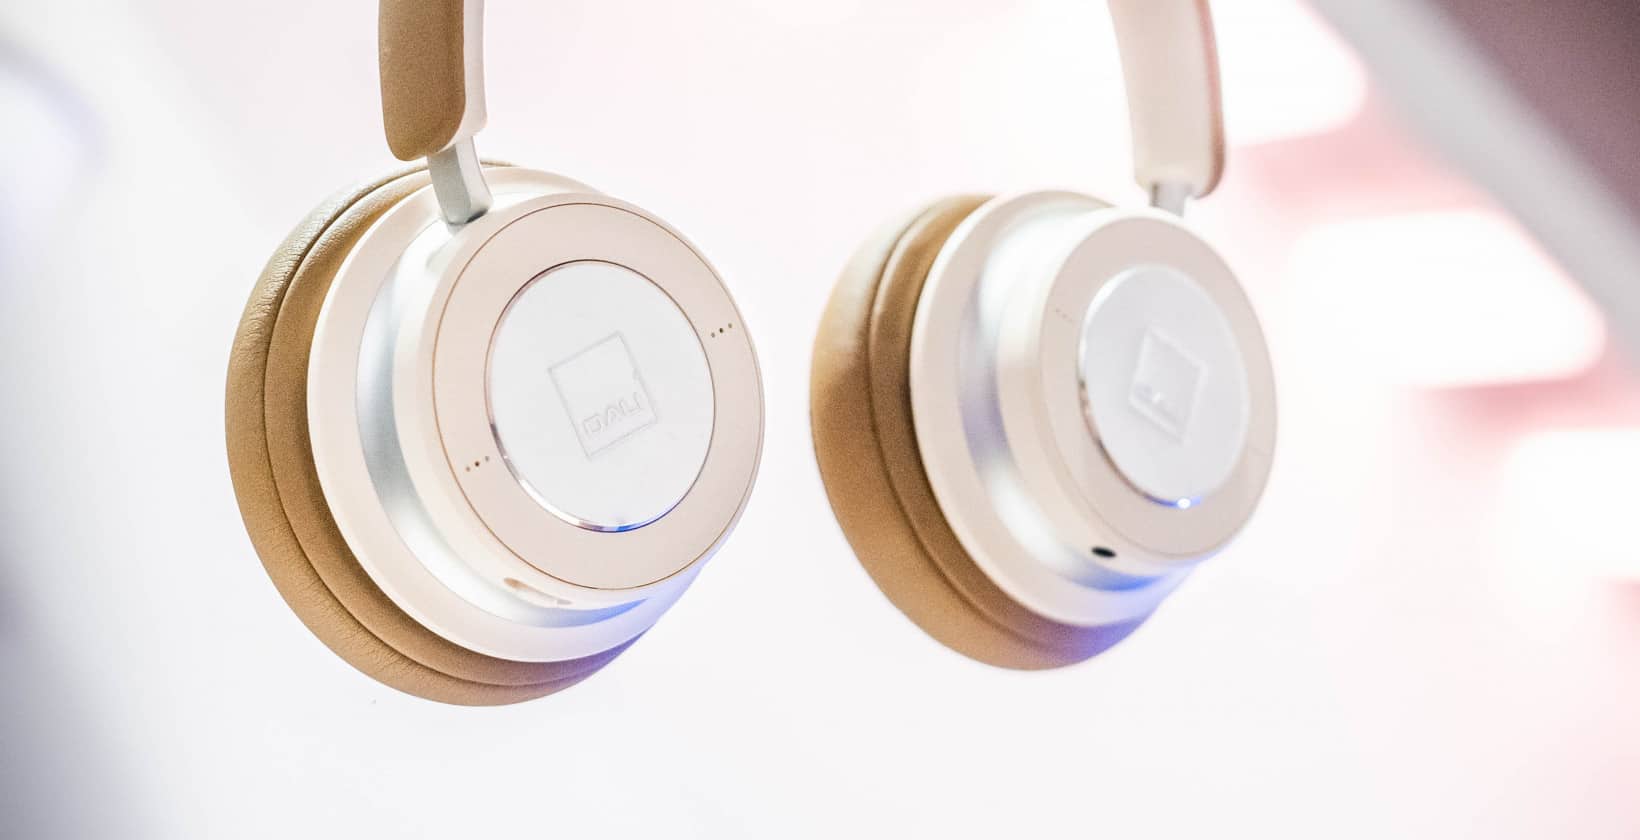 Review: Dali’s IO-6 are a new contender for best noise-canceling headphones 1